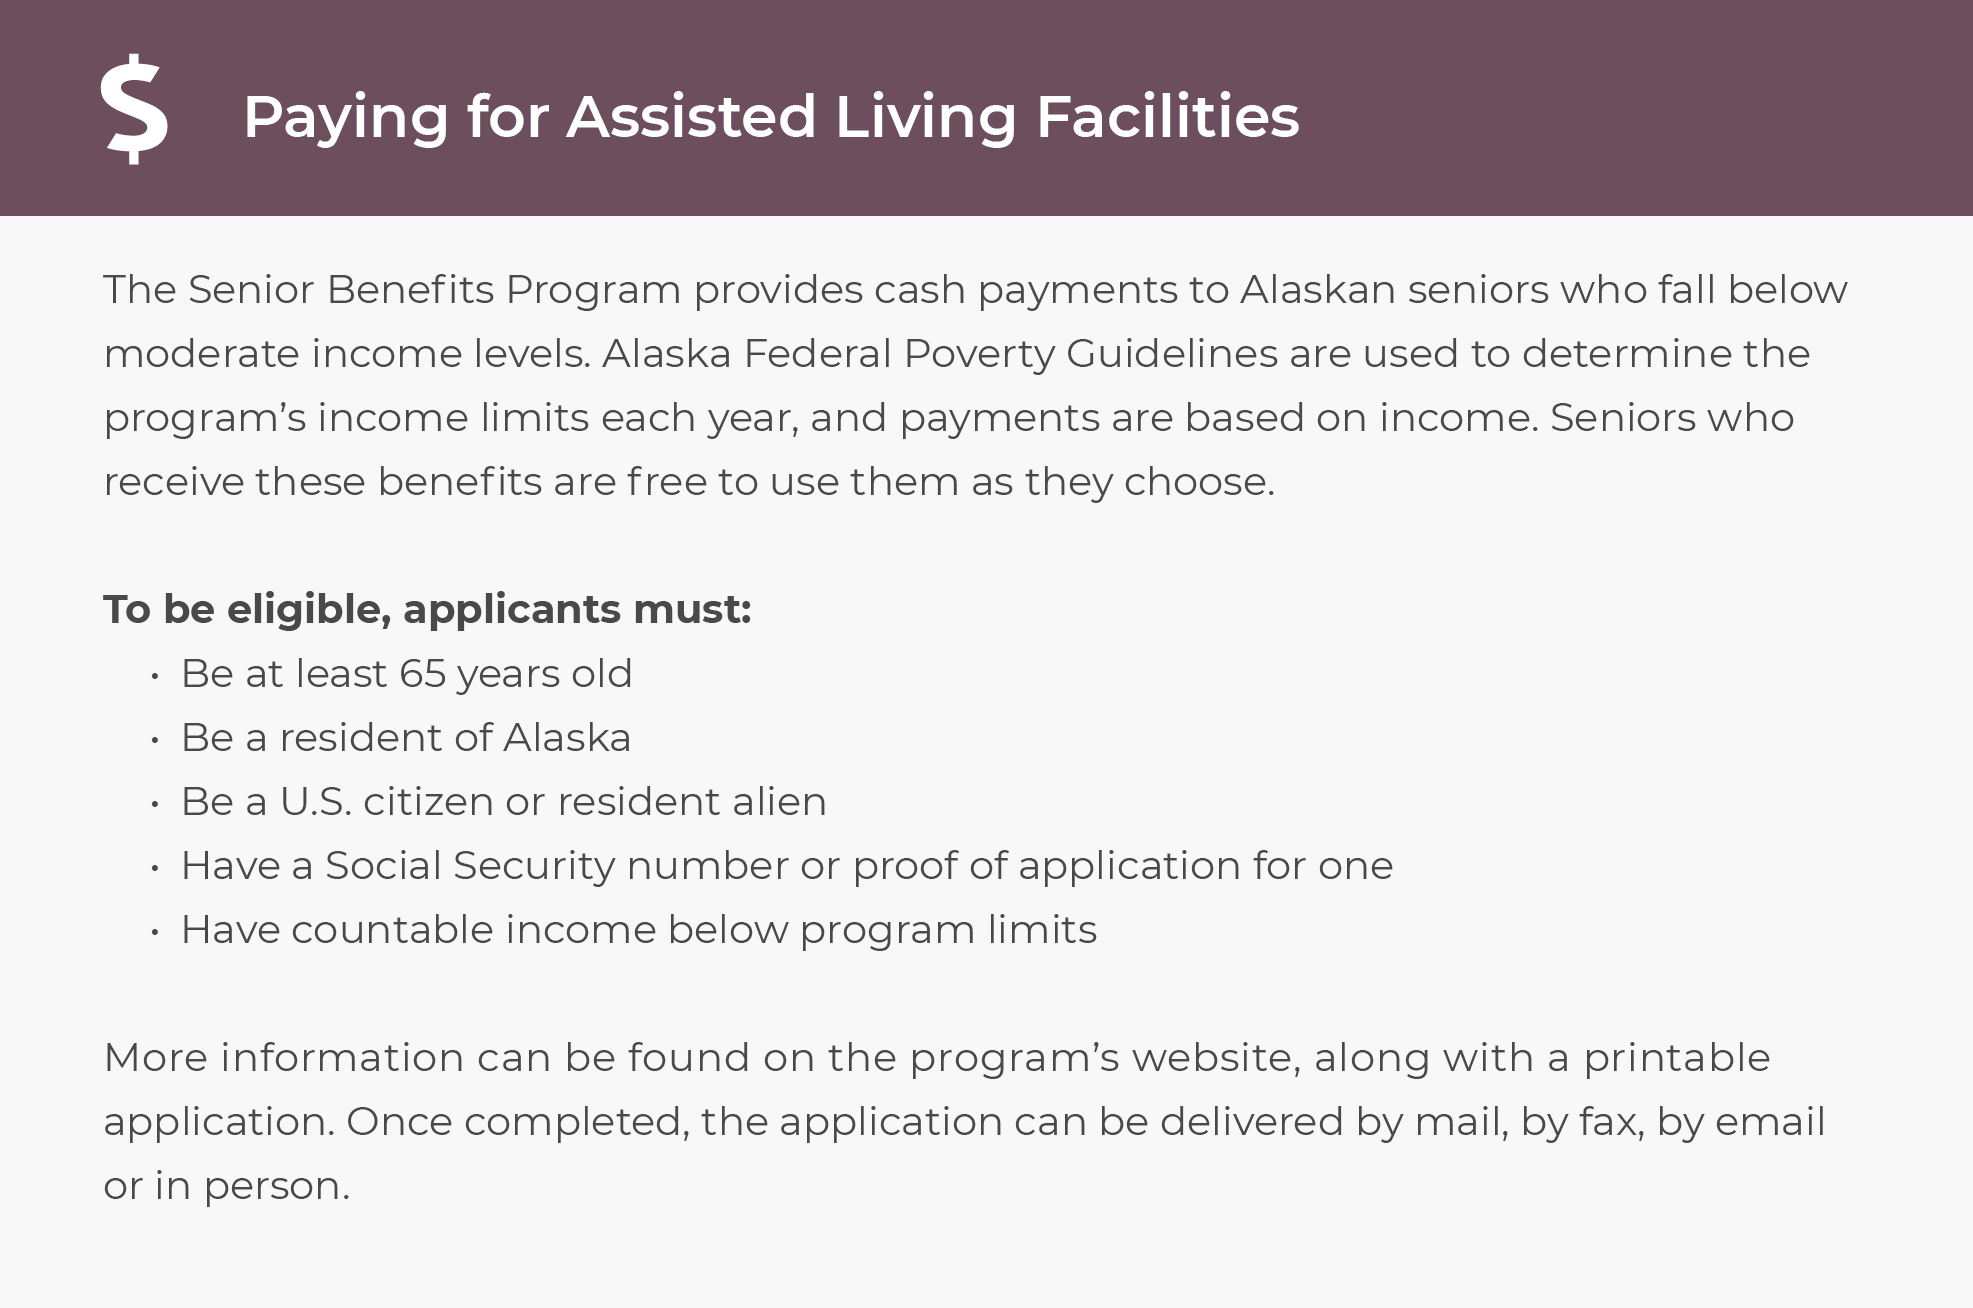 Paying for Assisted Living in Alaska